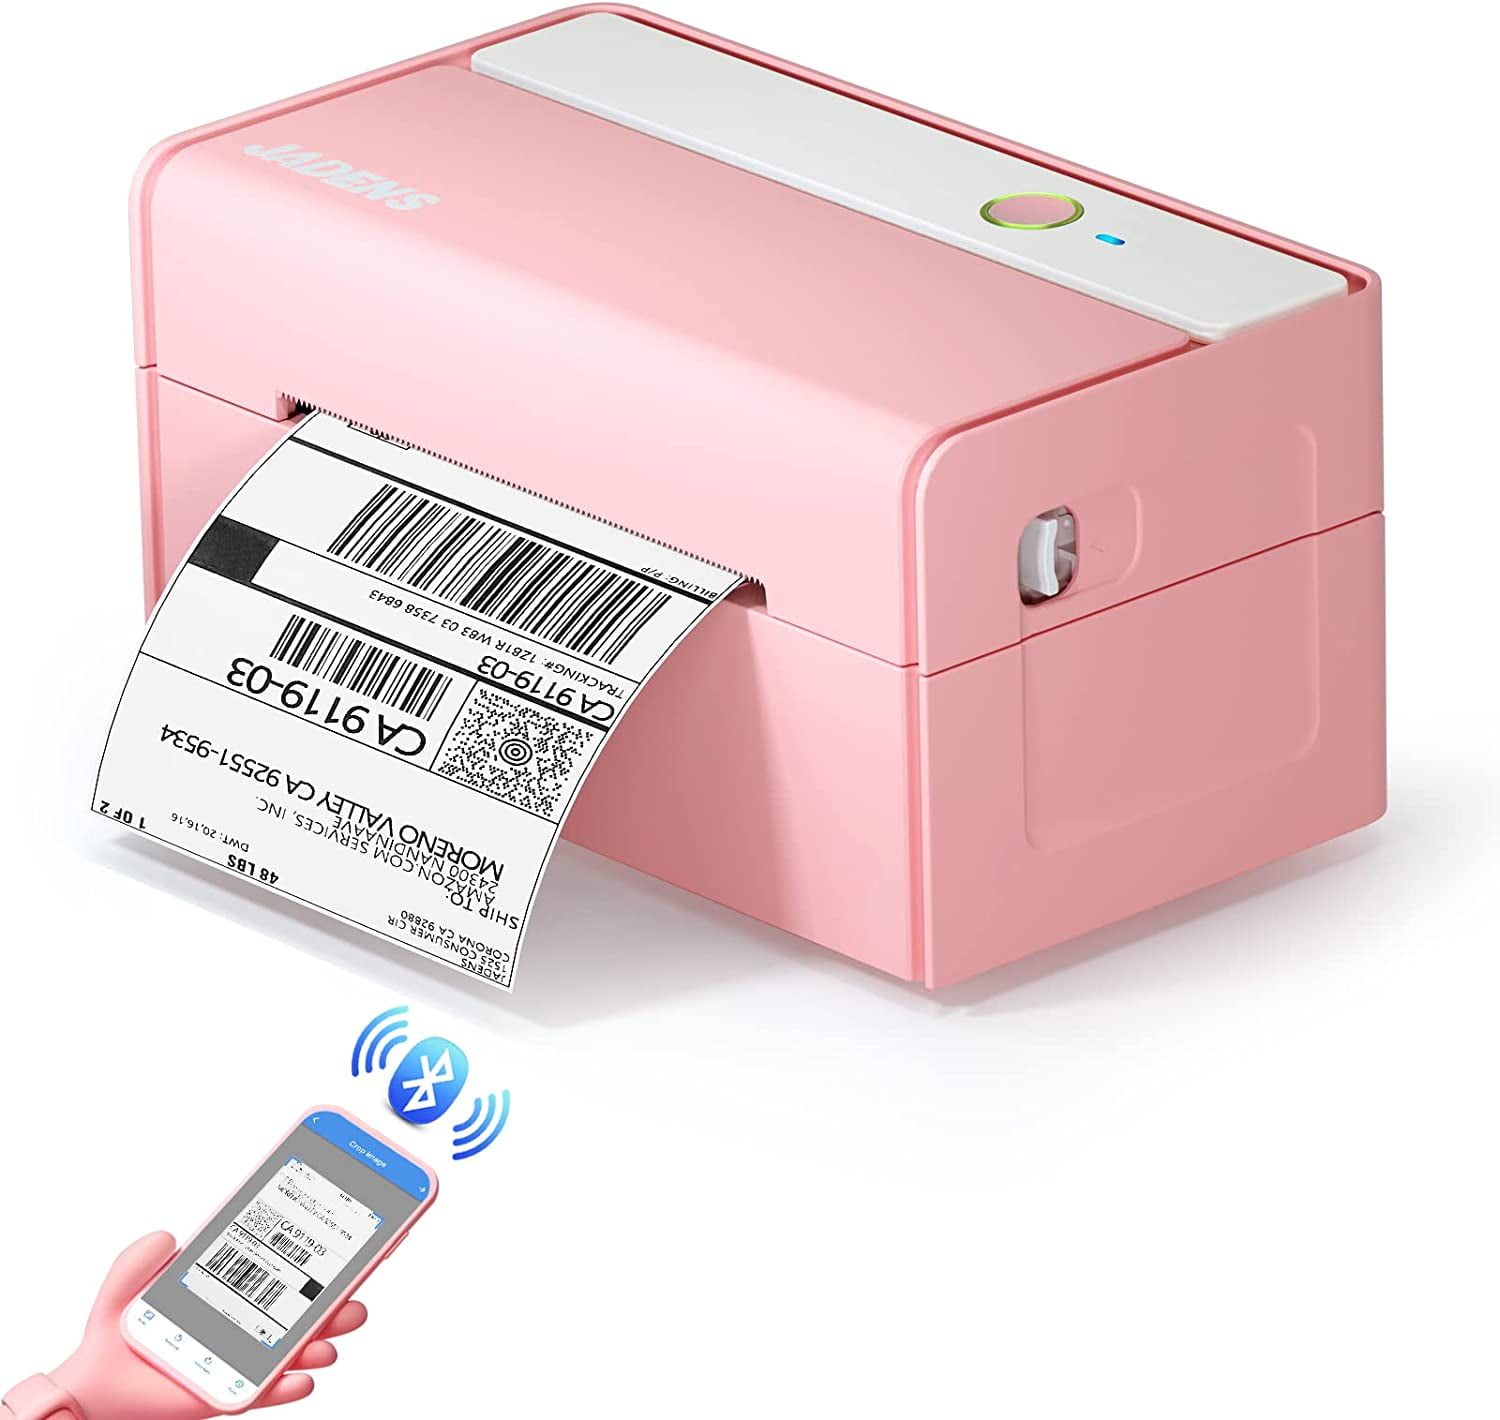 JADENS Bluetooth Thermal Label Printer, 4x6 Wireless Label Printer for Small Business and Packages, Compatible with Smartphones, Windows, Pink - Walmart.com